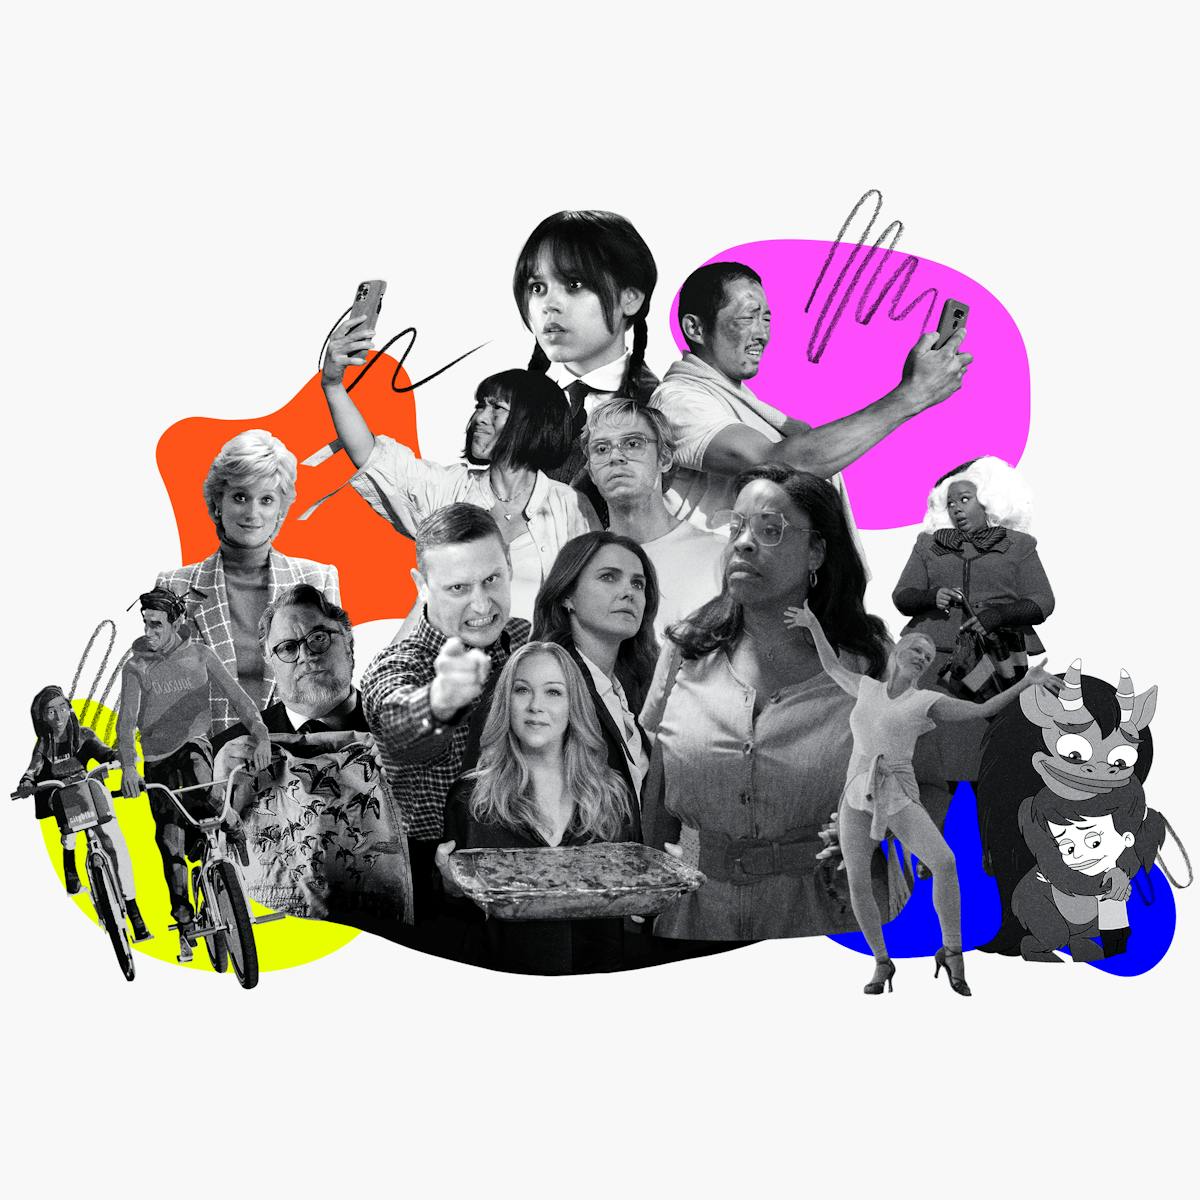 A collage of some of Netflix's Emmy nominees. From left to right are: Scott Mescudi and Jessica Williams's animated characters, Jabari and Meadow, on bikes; Princess Diana (Elizabeth Debicki) in a plaid jacket; Guillermo del Toro, Tim Robinson, Amy (Ali Wong) and Danny (Steven Yeun) holding their phones to the sky, Jen Harding (Christina Applegate); Kate Wyler (Keri Russell) in a blazer looking official; Wednesday Addams (Jenna Ortega) in her signature white and black combo; Jeffrey Dahmer (Evan Peters) and Glenda Cleveland (Niecy Nash-Betts) in very 70s glasses; Pamela Anderson in heels and a leotard practicing for Chicago; and two Big Mouth characters, Connie the Hormone Monstress (Maya Rudolph) hugs Jessi (Jessi Glaser). 